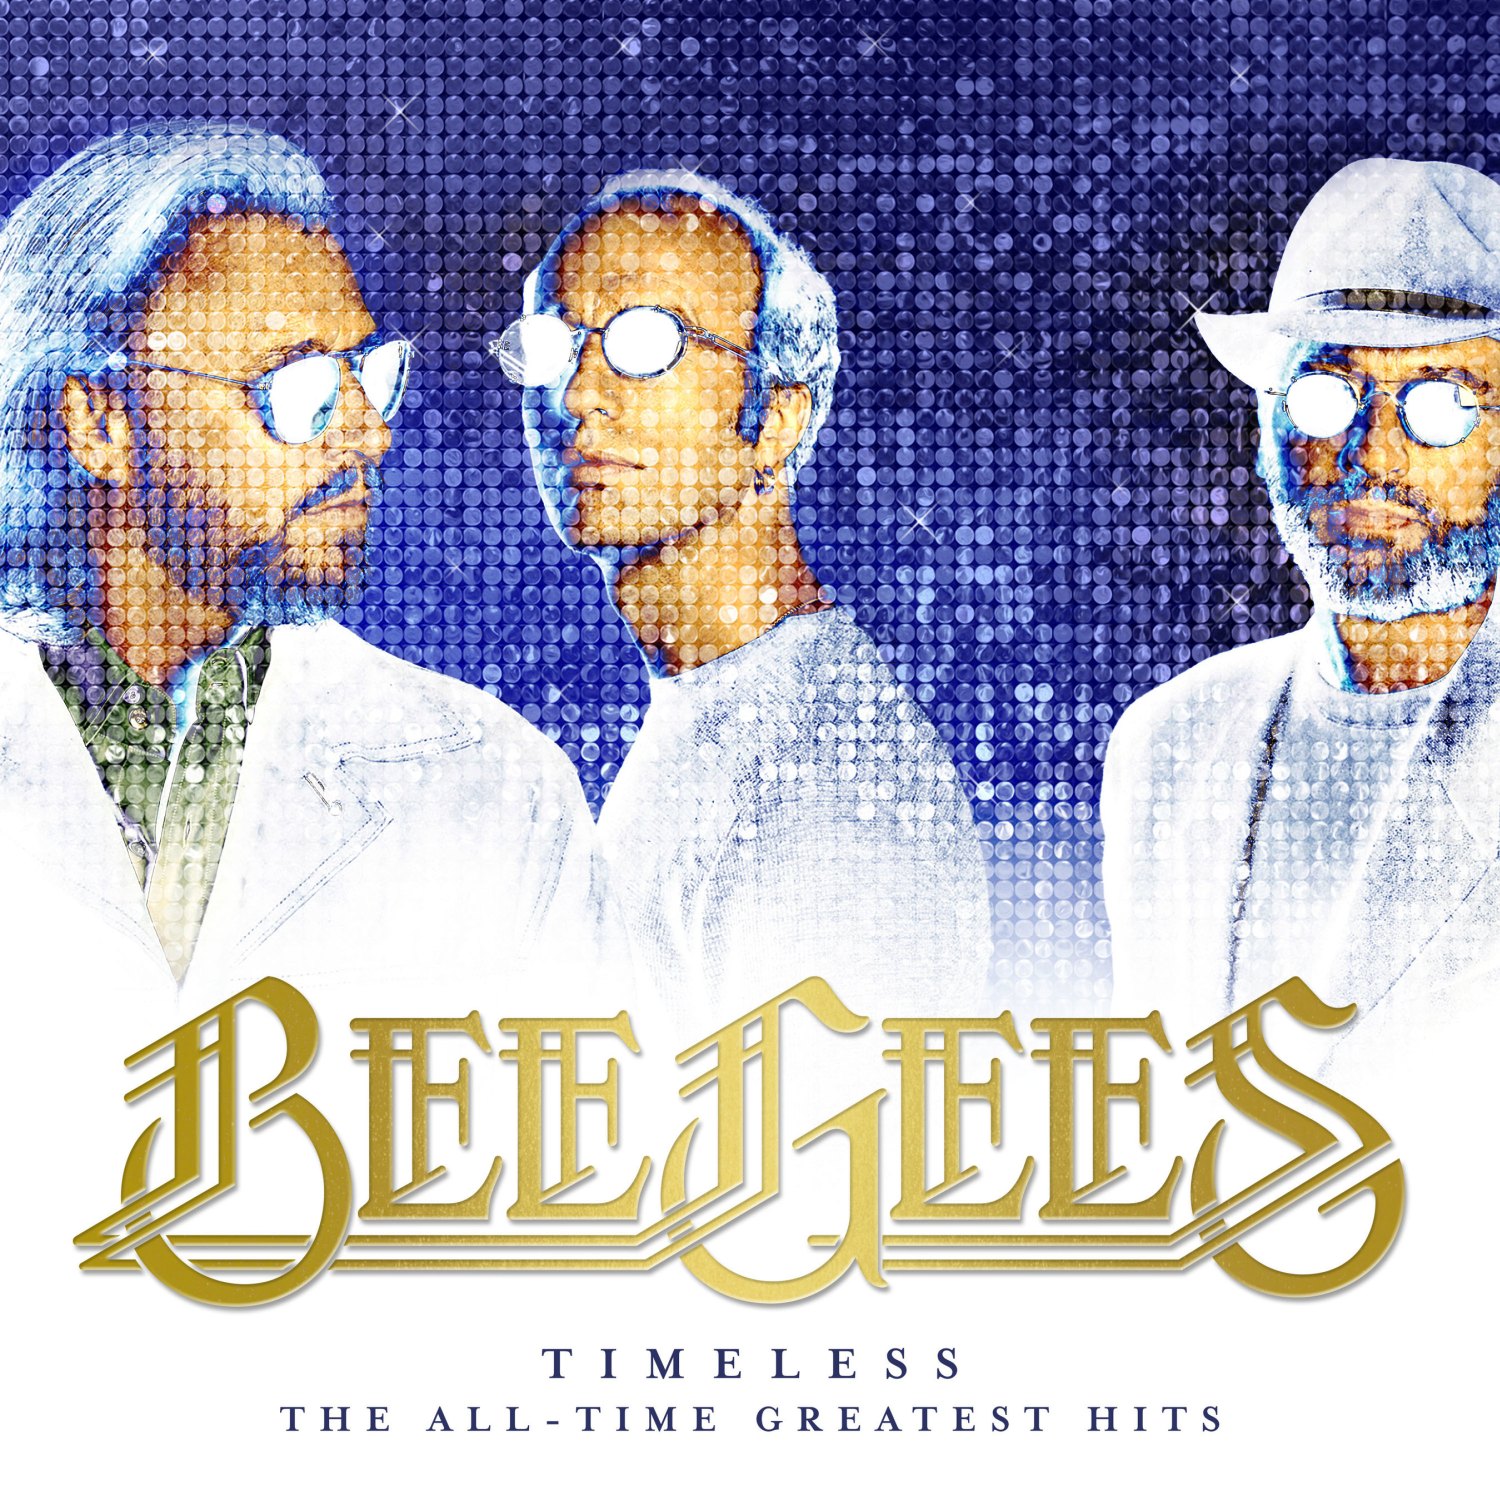 Bee Gees Timeless The All Time Greatest Hits